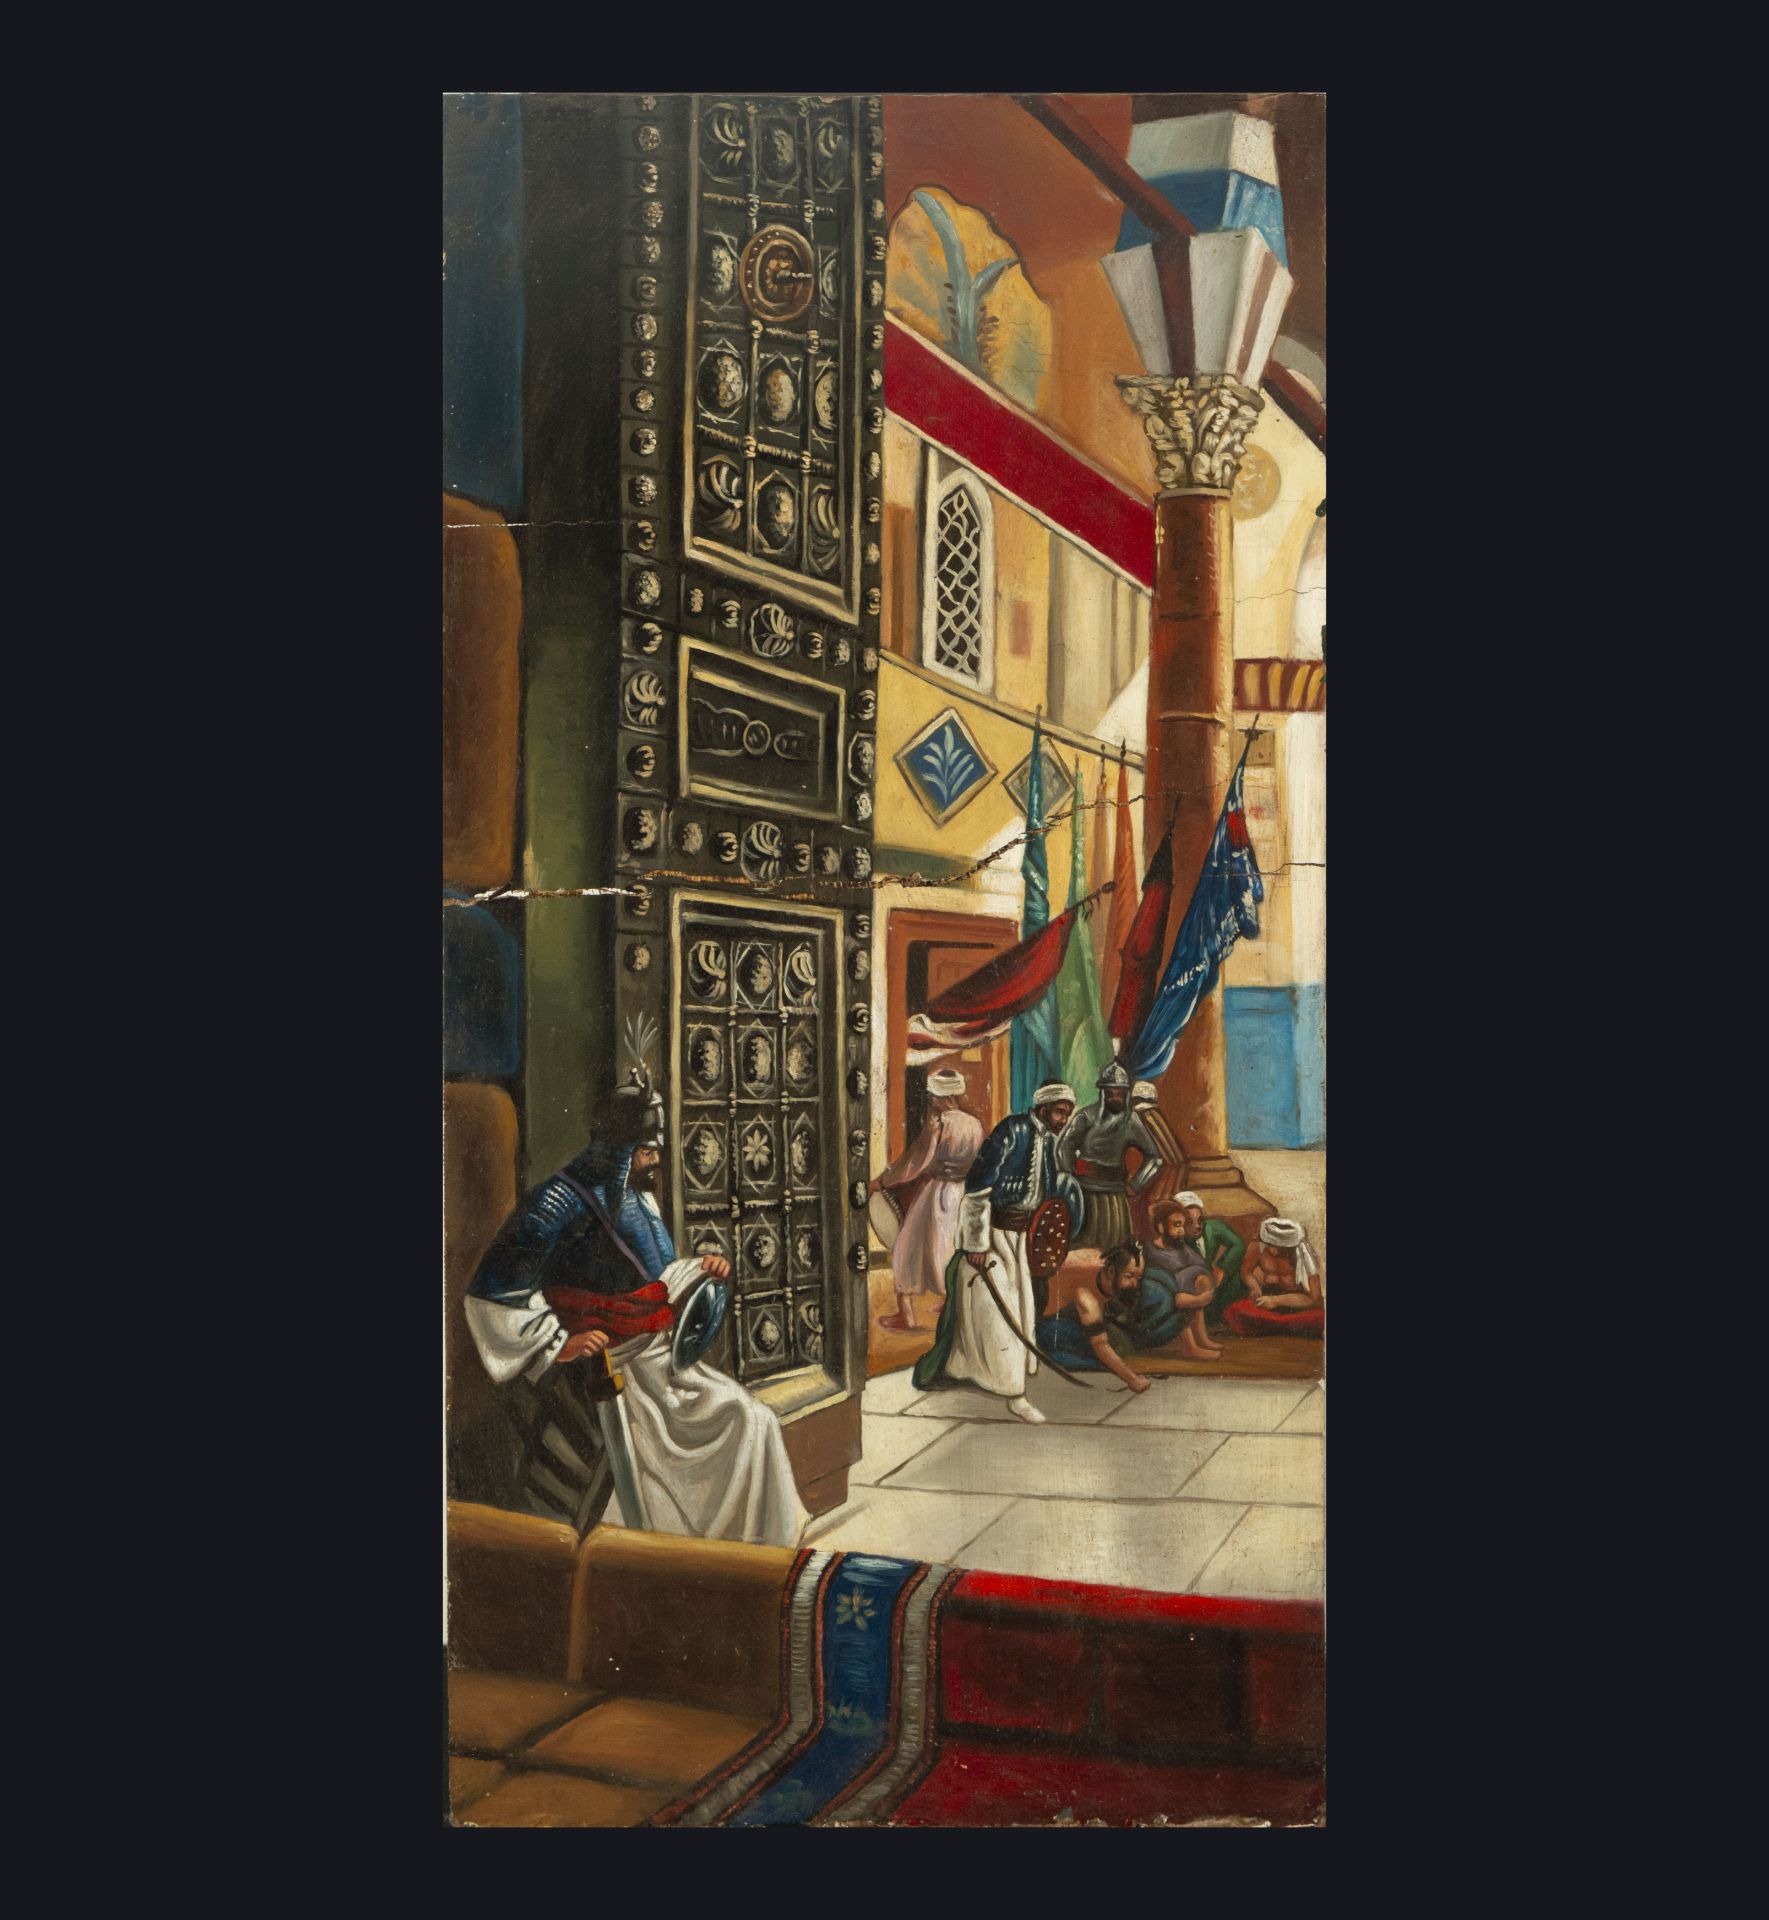 Pair of Orientalist scenes from the Souk and Interior of the Orientalist Palace, oil on panel, signe - Image 2 of 5